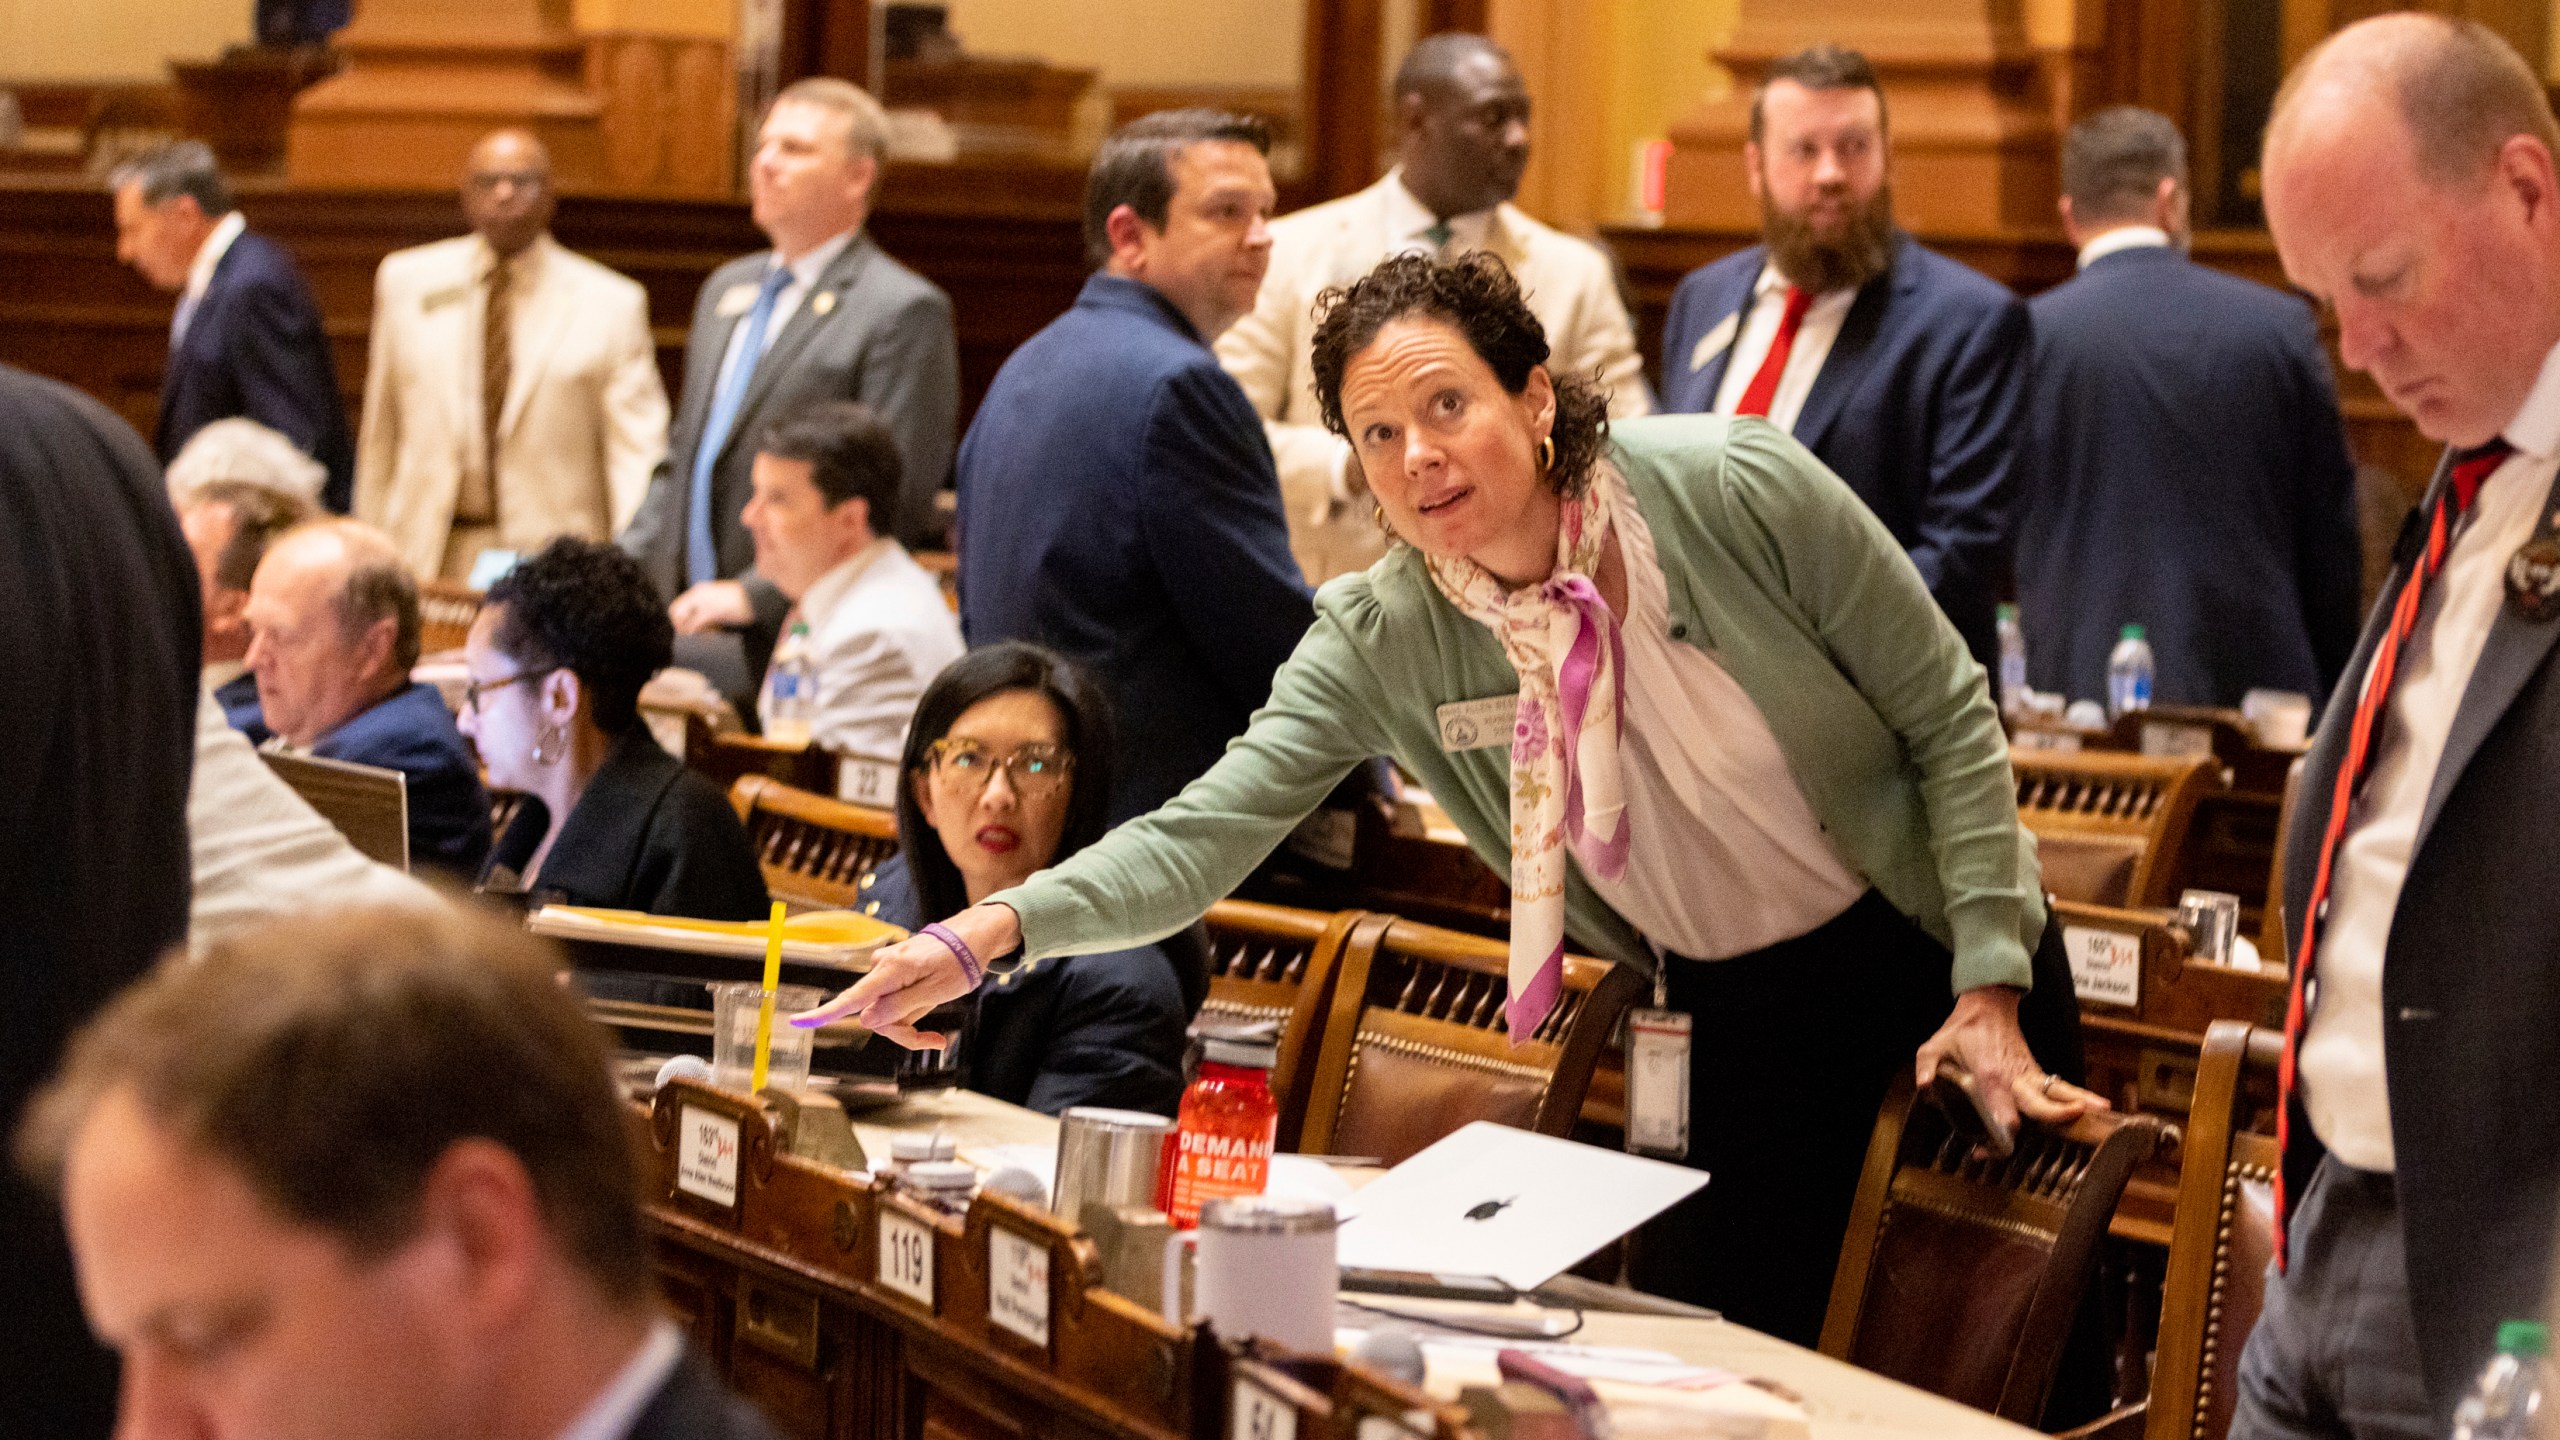 State Rep. Anne Allen Westbrook, D-Savannah, votes on Election Bill SB 189, regarding ballot scanners, at the House of Representatives in the Capitol in Atlanta on Sine Die, the last day of the legislative session, Thursday, March 28, 2024. (Arvin Temkar/Atlanta Journal-Constitution via AP)